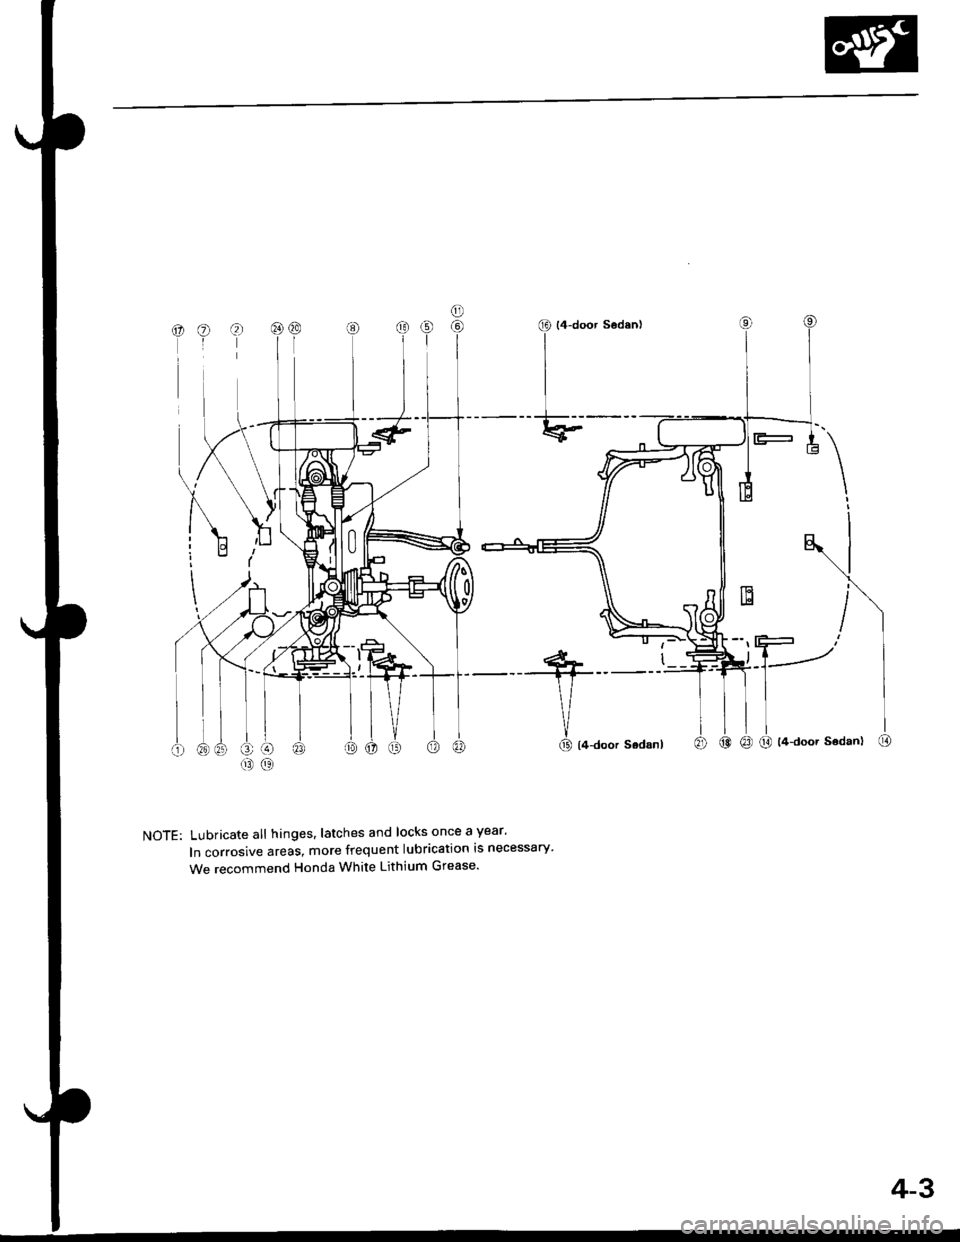 HONDA CIVIC 1999 6.G Manual PDF NOTE: Lubricate all hinges, latches and locks once a year
ln corrosive areas, more frequent lubrication is necessary
We recommend Honda White Lithium Grease
4-3 